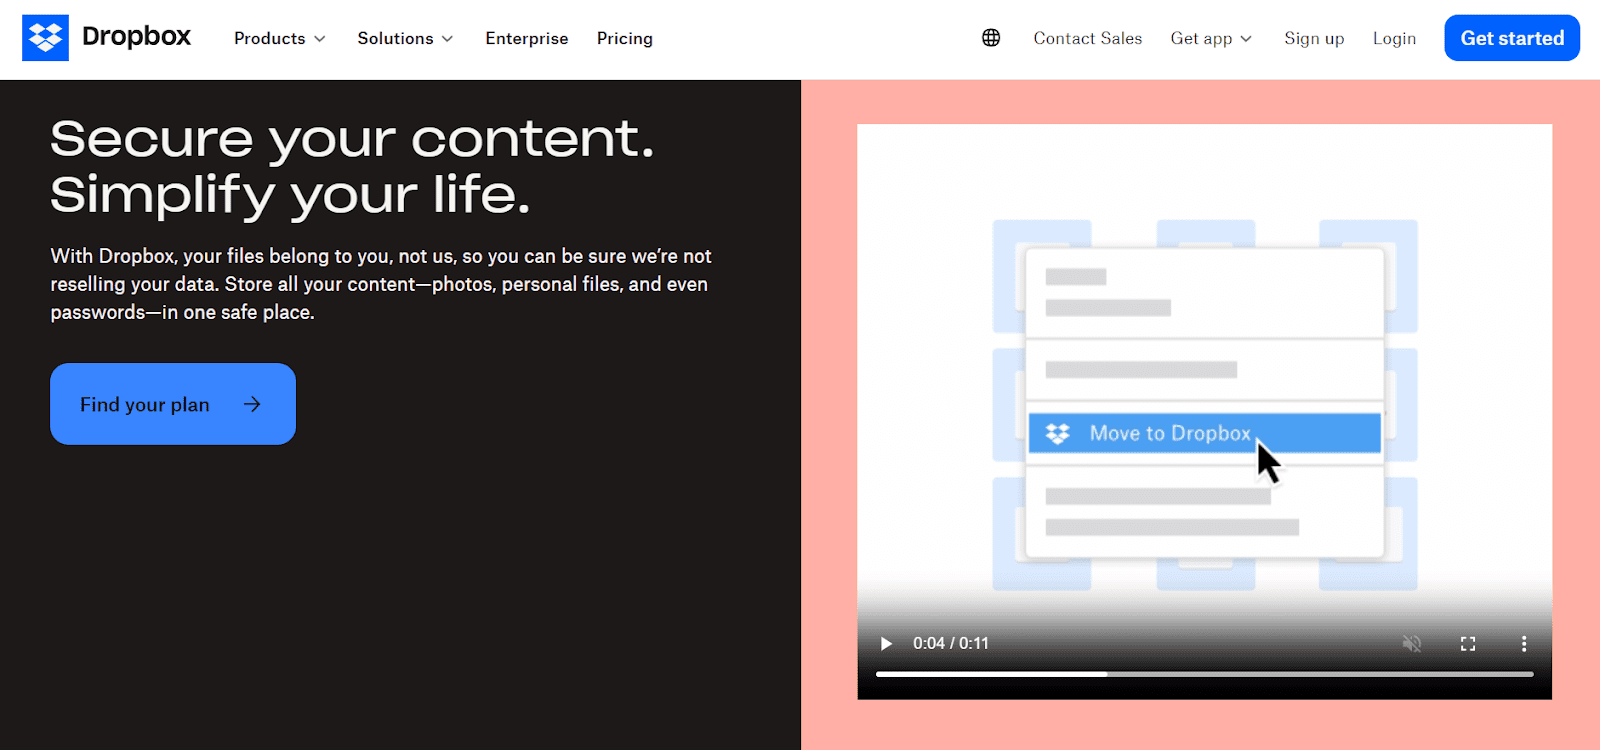 screenshot of a Dropbox page with simple copy and an explainer video